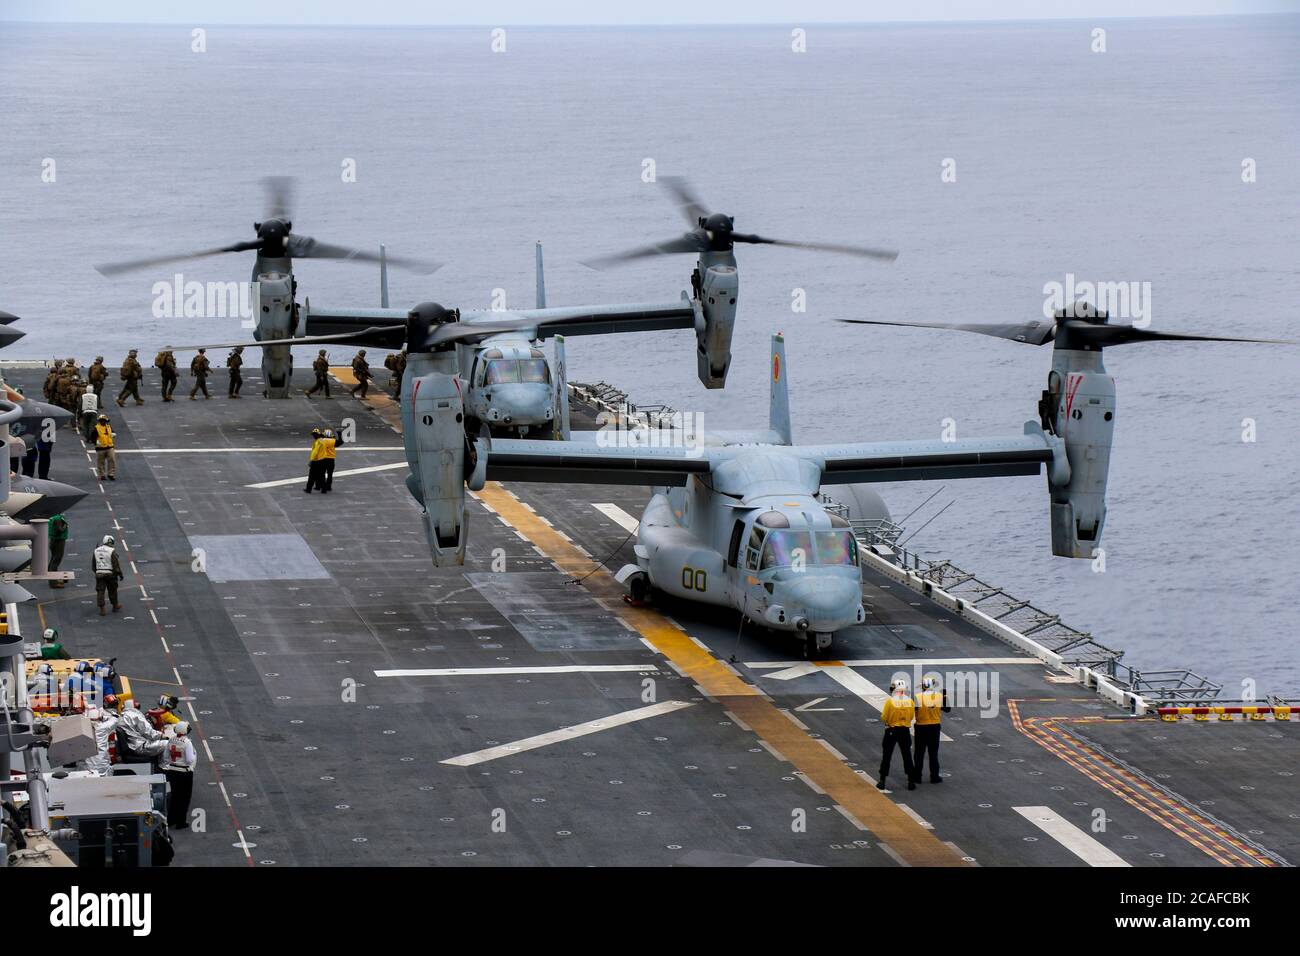 PACIFIC OCEAN (August 5, 2020) – Marines assigned to 15th Marine Expeditionary Unit board an MV-22 Osprey, attached to Medium Tiltrotor Squadron (Reinforced) 164, aboard the amphibious assault ship USS Makin Island (LHD 8). Makin Island, homeported in San Diego, is conducting routine operations in the eastern Pacific. (U.S. Navy photo by Mass Communication Specialist Seaman Nadia Lund) Stock Photo